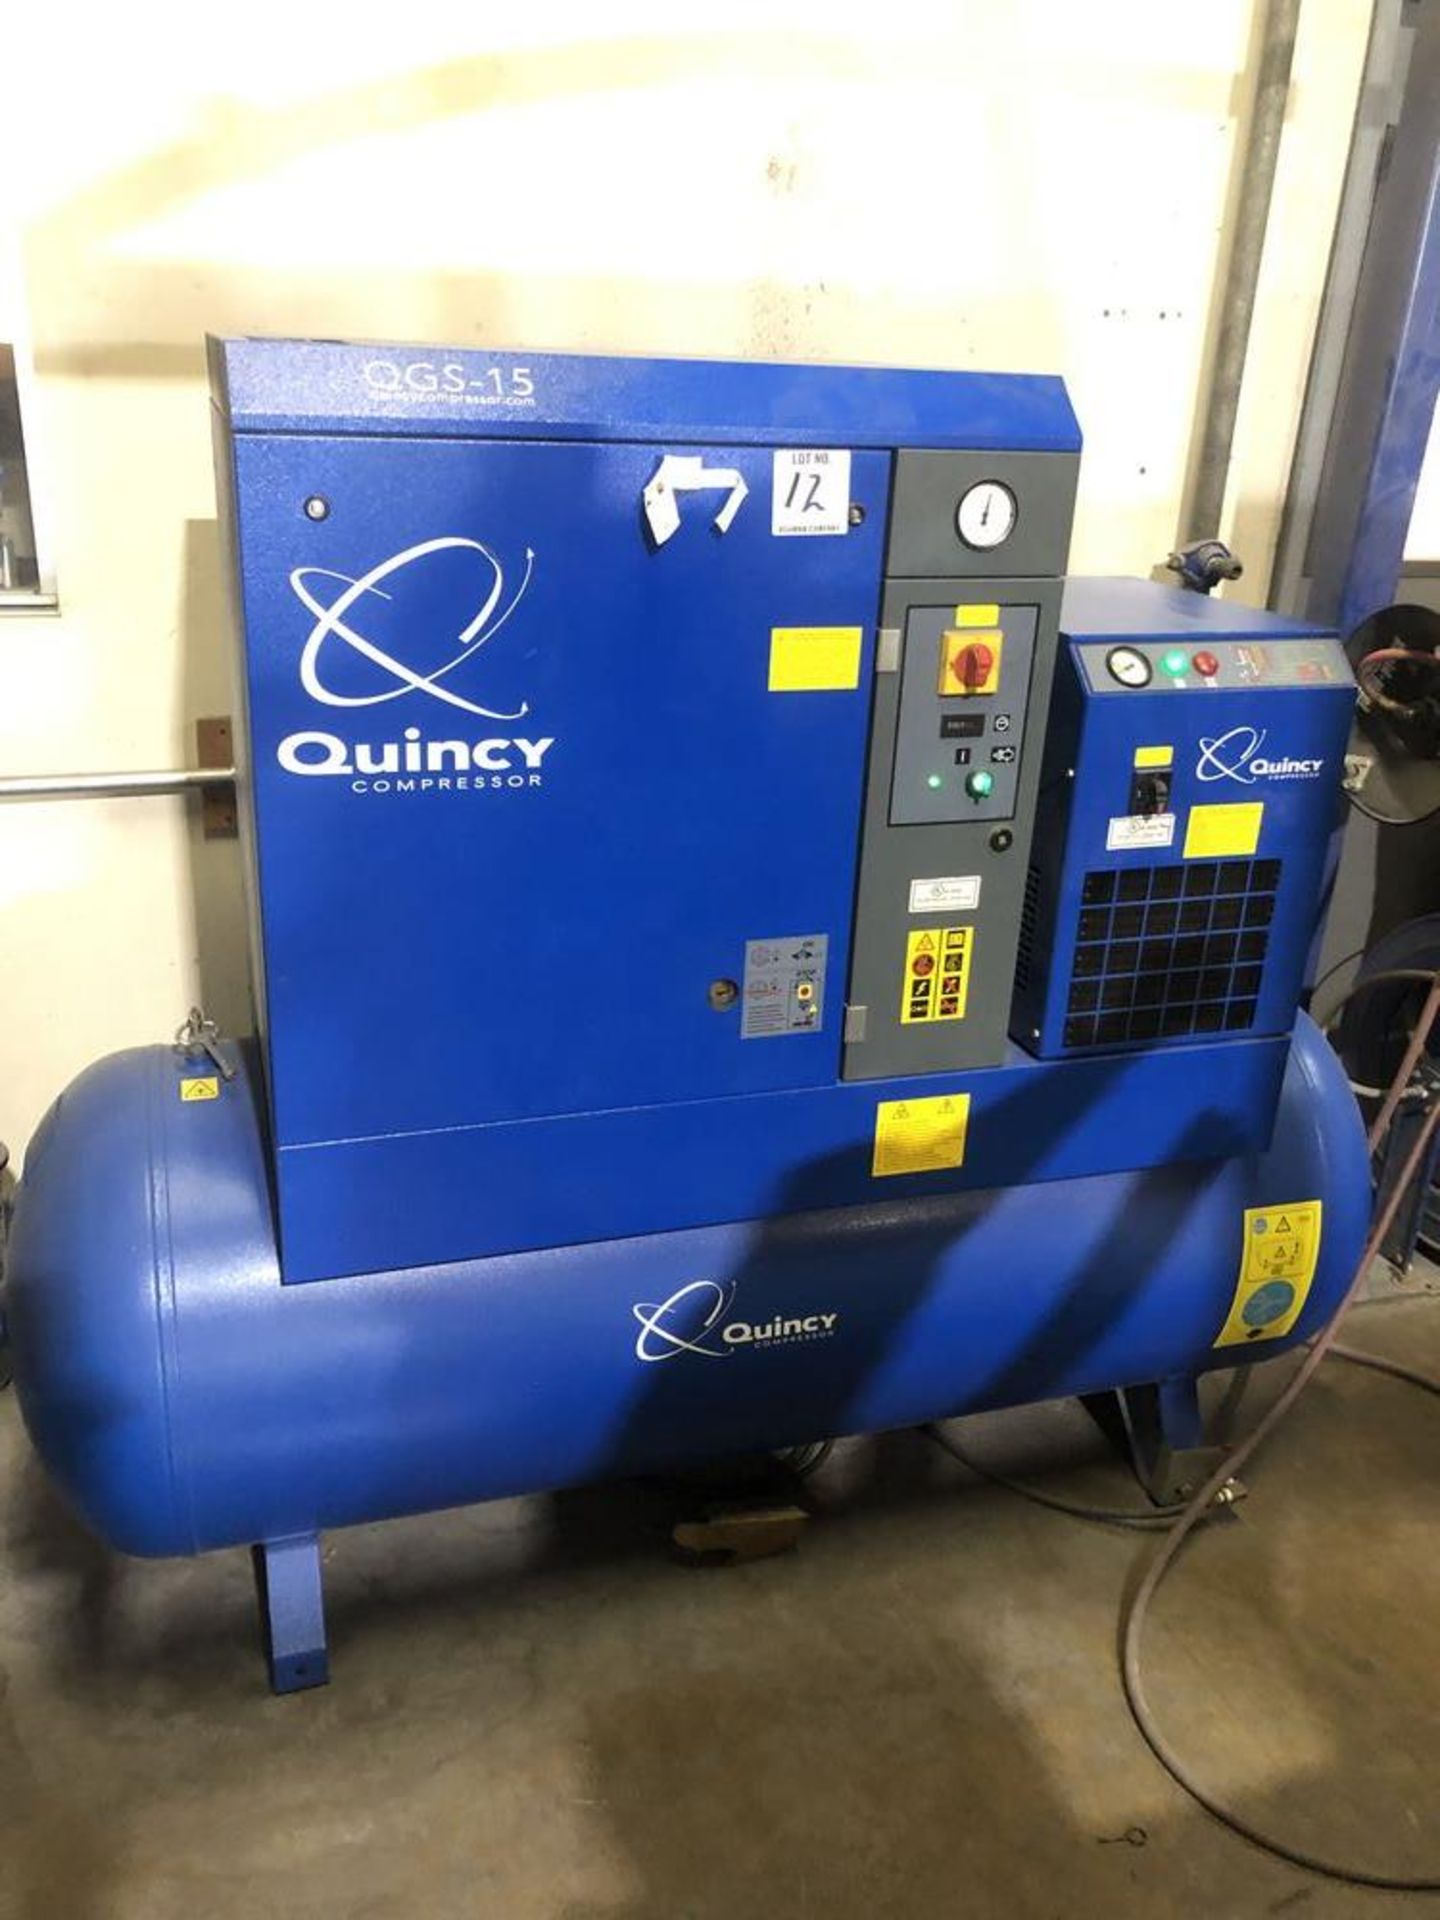 (1) 2012 Quincy QGS-15 Air Compressor- 15 hp motor, rotary screw, 60 gallon tank, 2,700 hours,